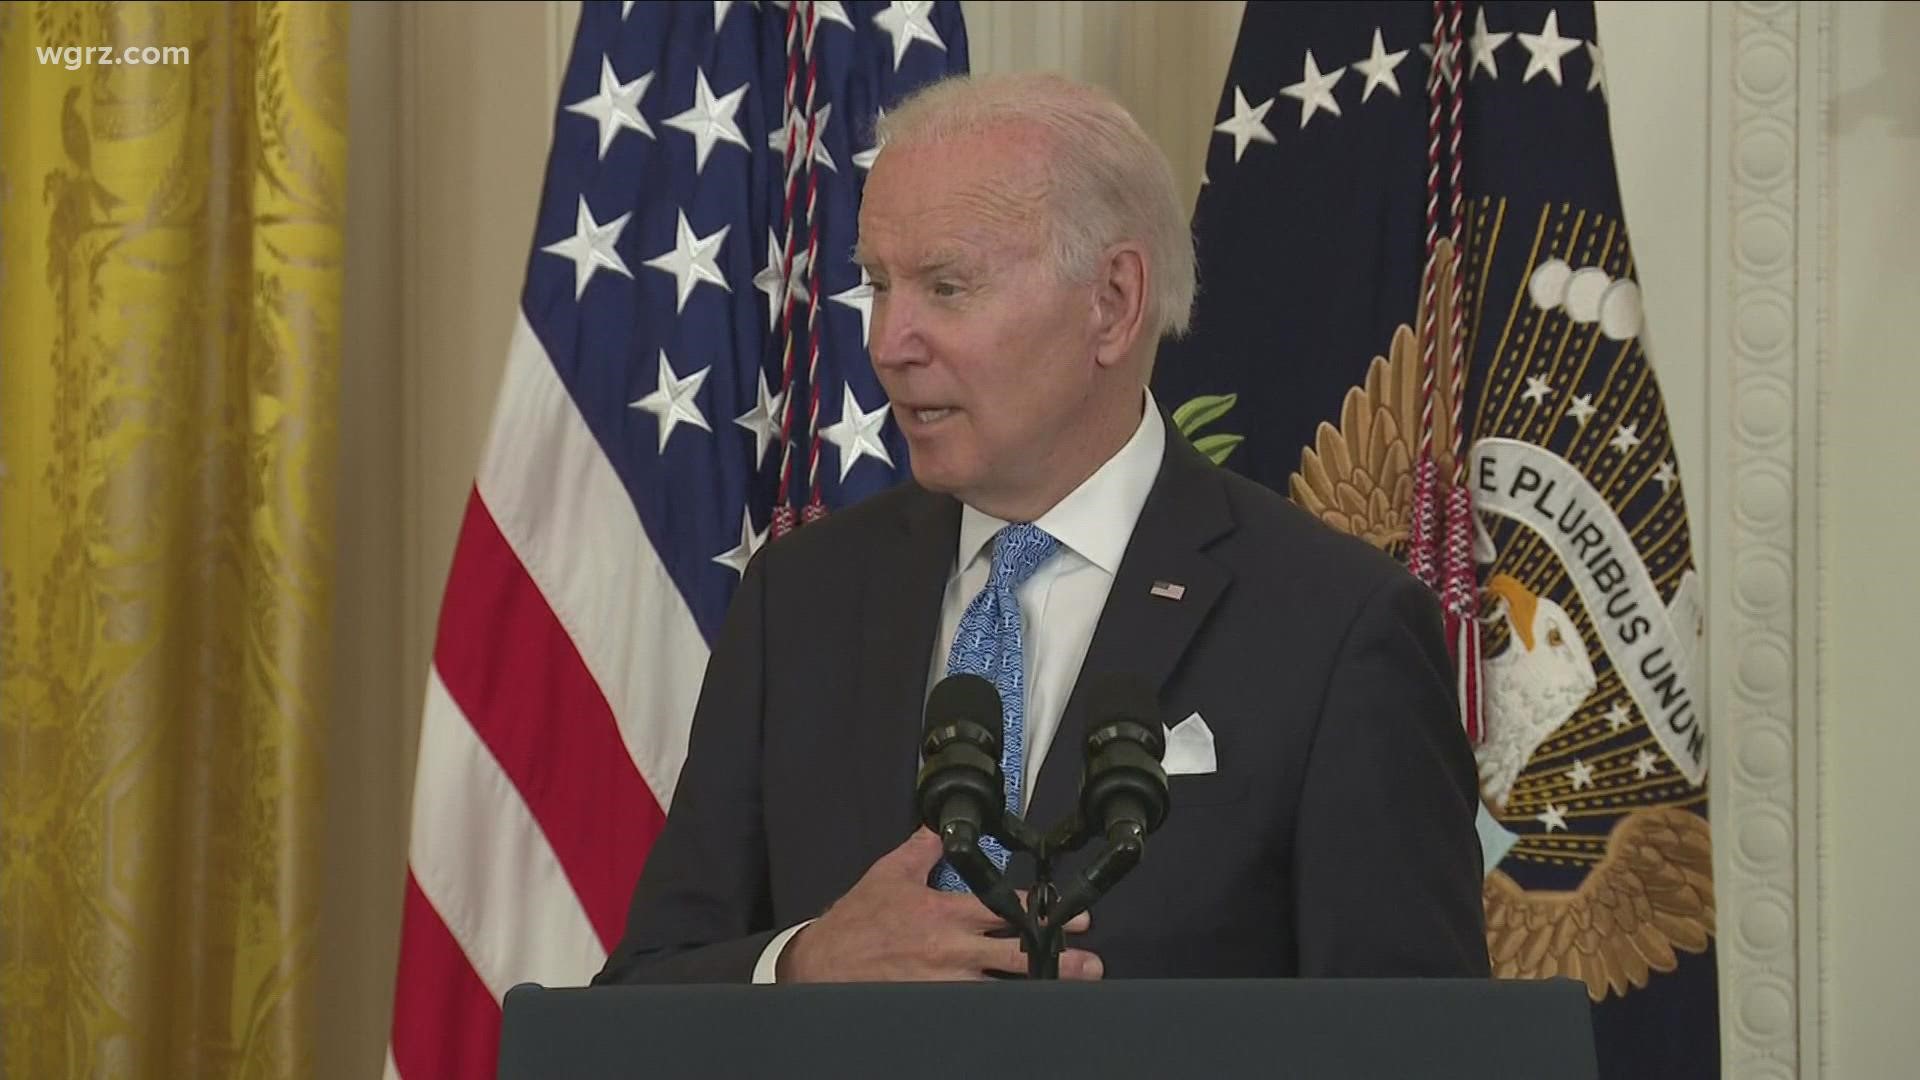 President Biden will visit Buffalo on Tuesday saying that he plans to grieve with the community.